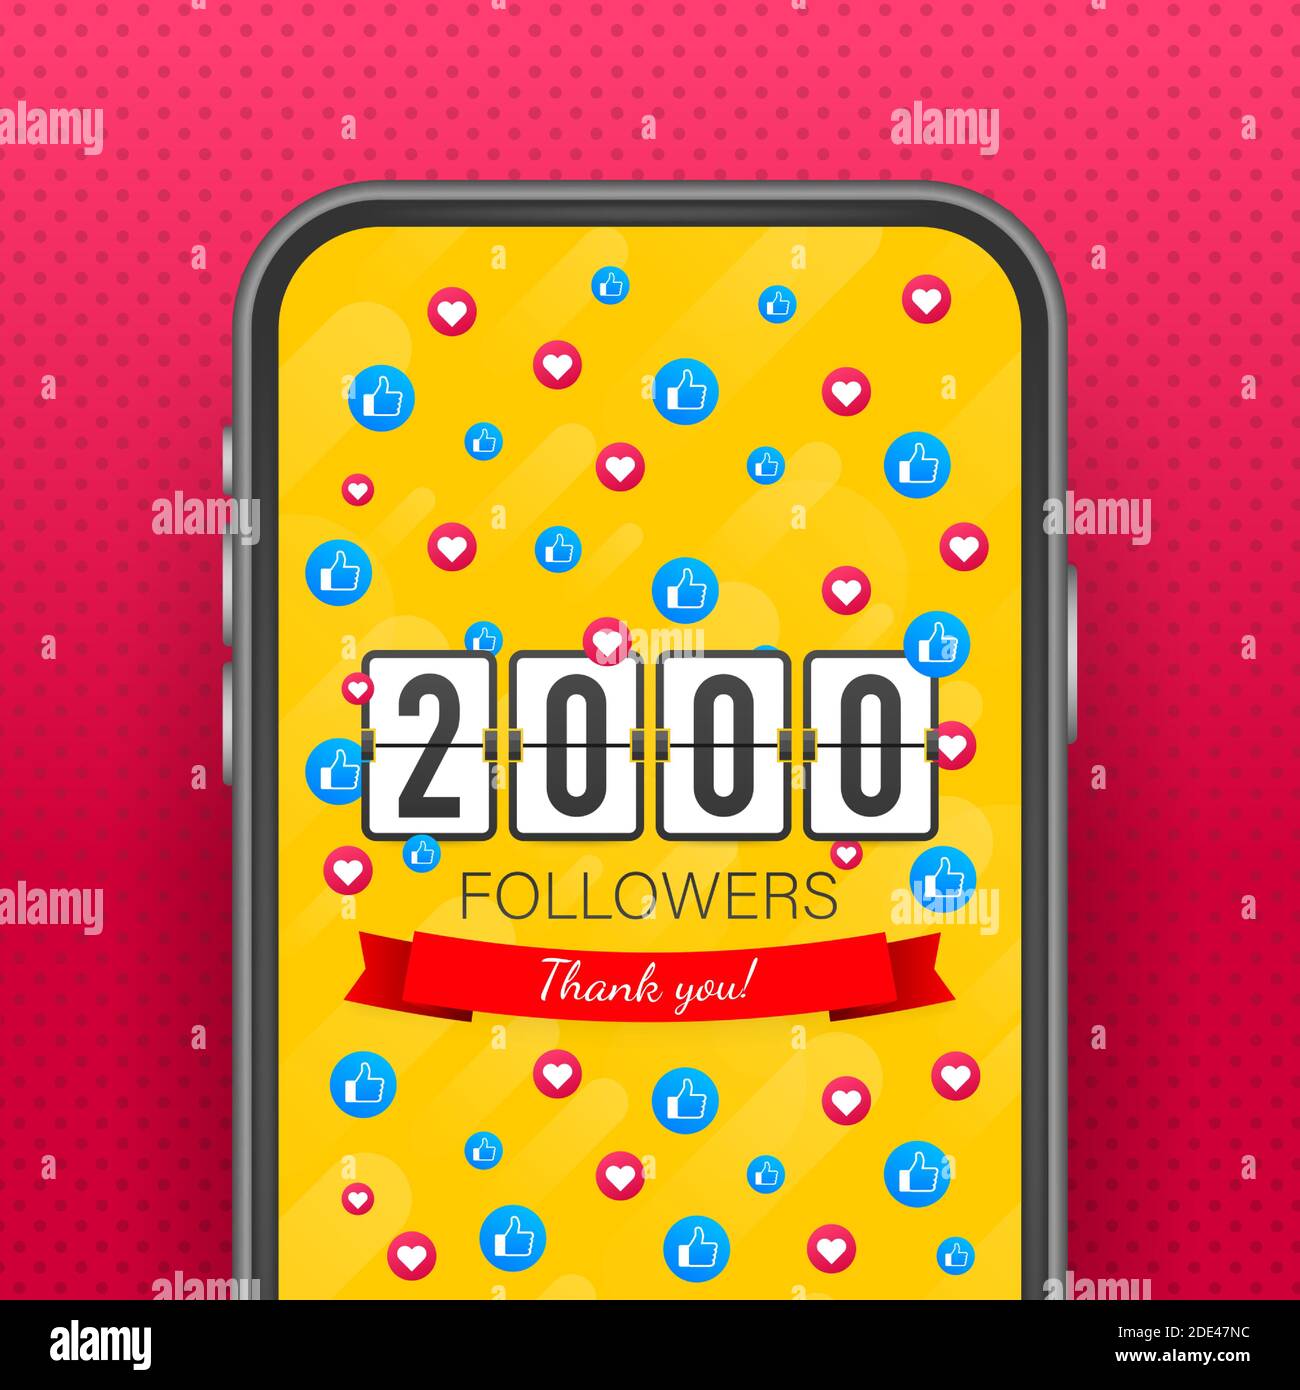 Thank you 2000 followers numbers. Congratulating multicolored thanks image for net friends likes. Stock Vector